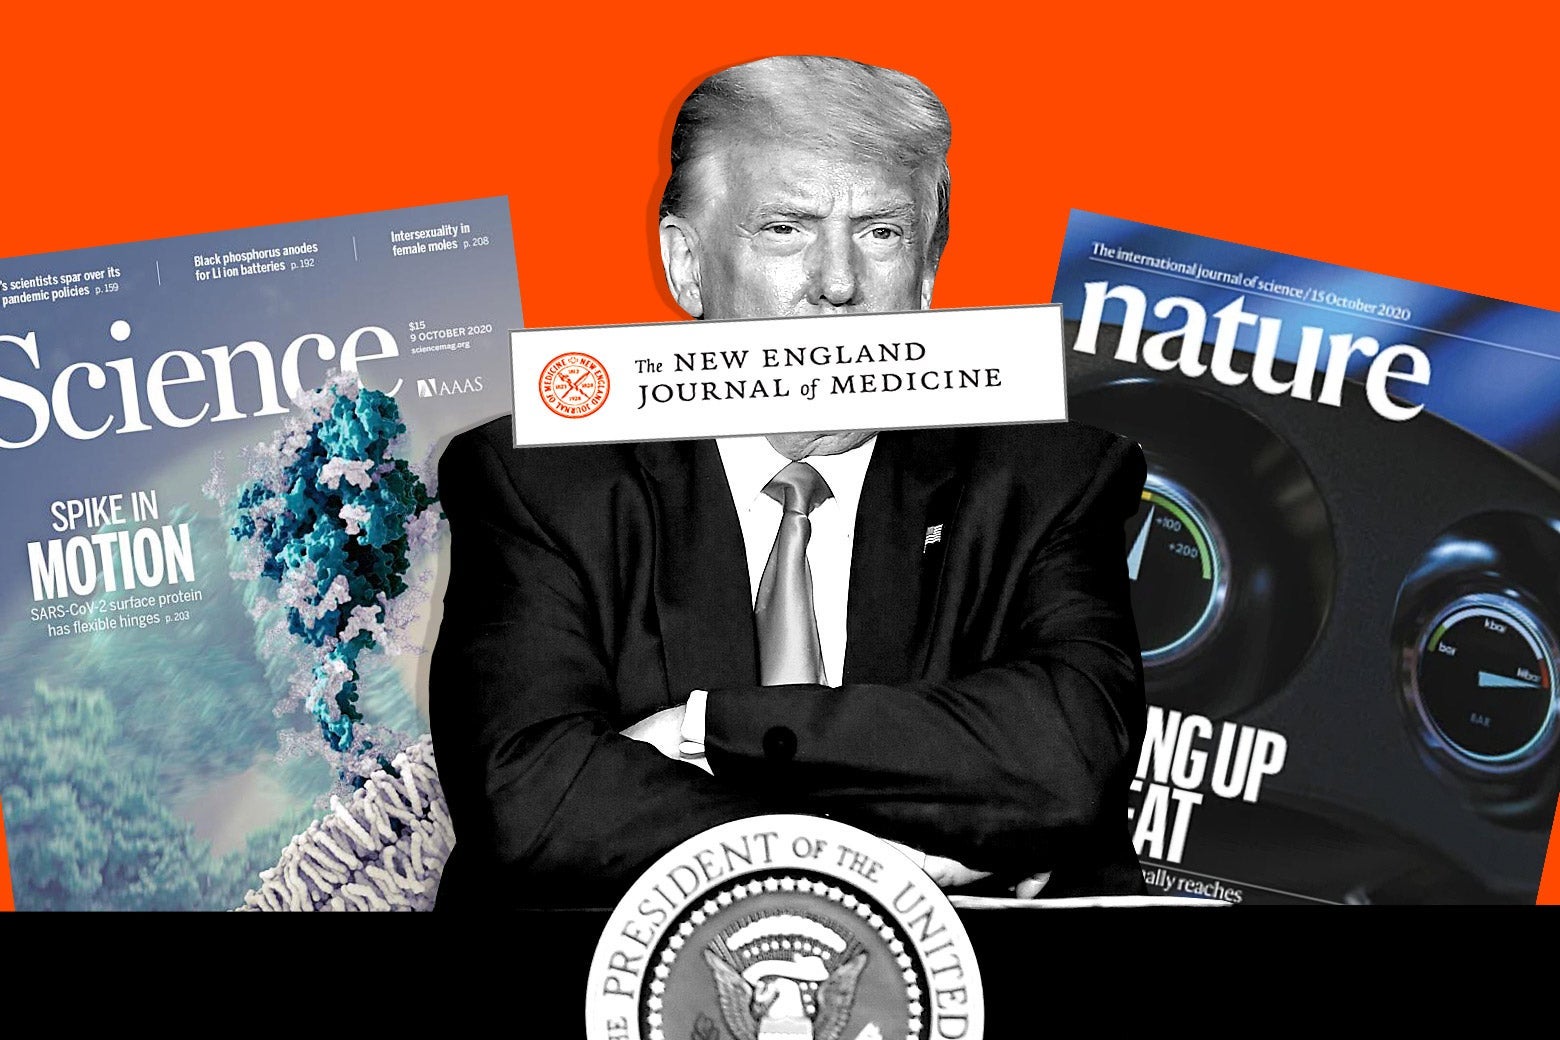 Collage of an annoyed Donald Trump sitting with his arms crossed, surrounded by science journals.